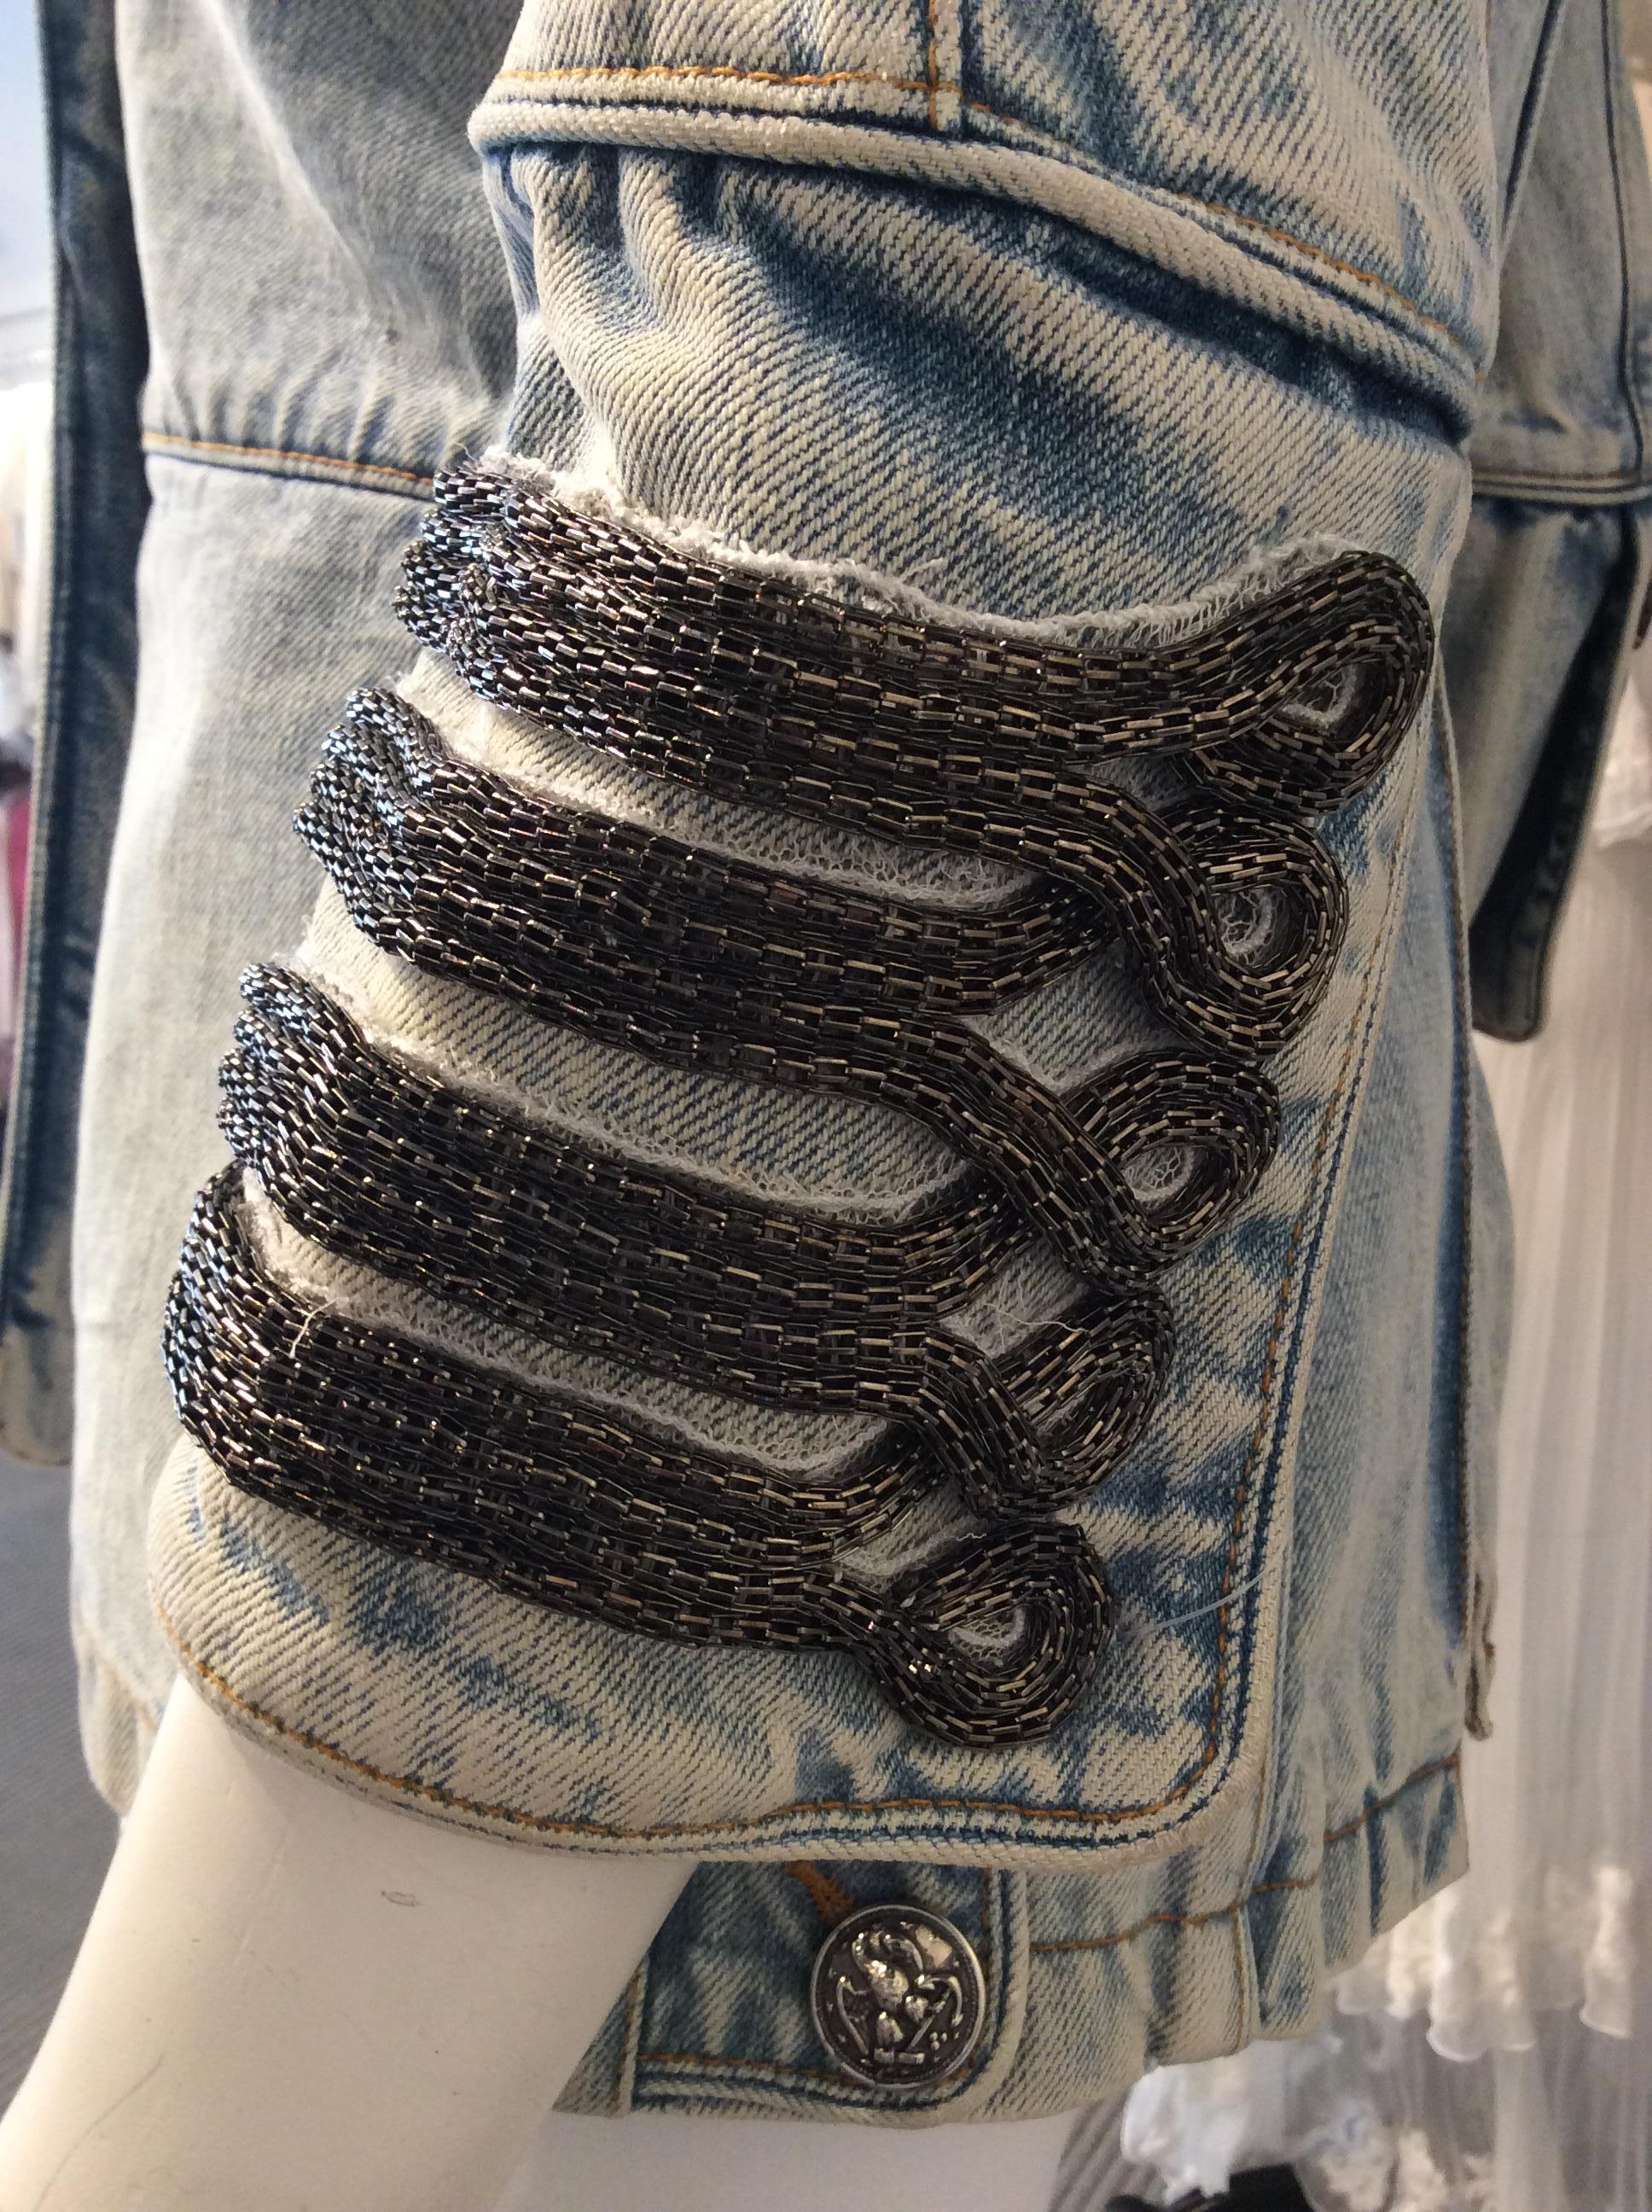 Balmain Beaded Aiguillette Military Jean Jacket  In Excellent Condition For Sale In San Francisco, CA